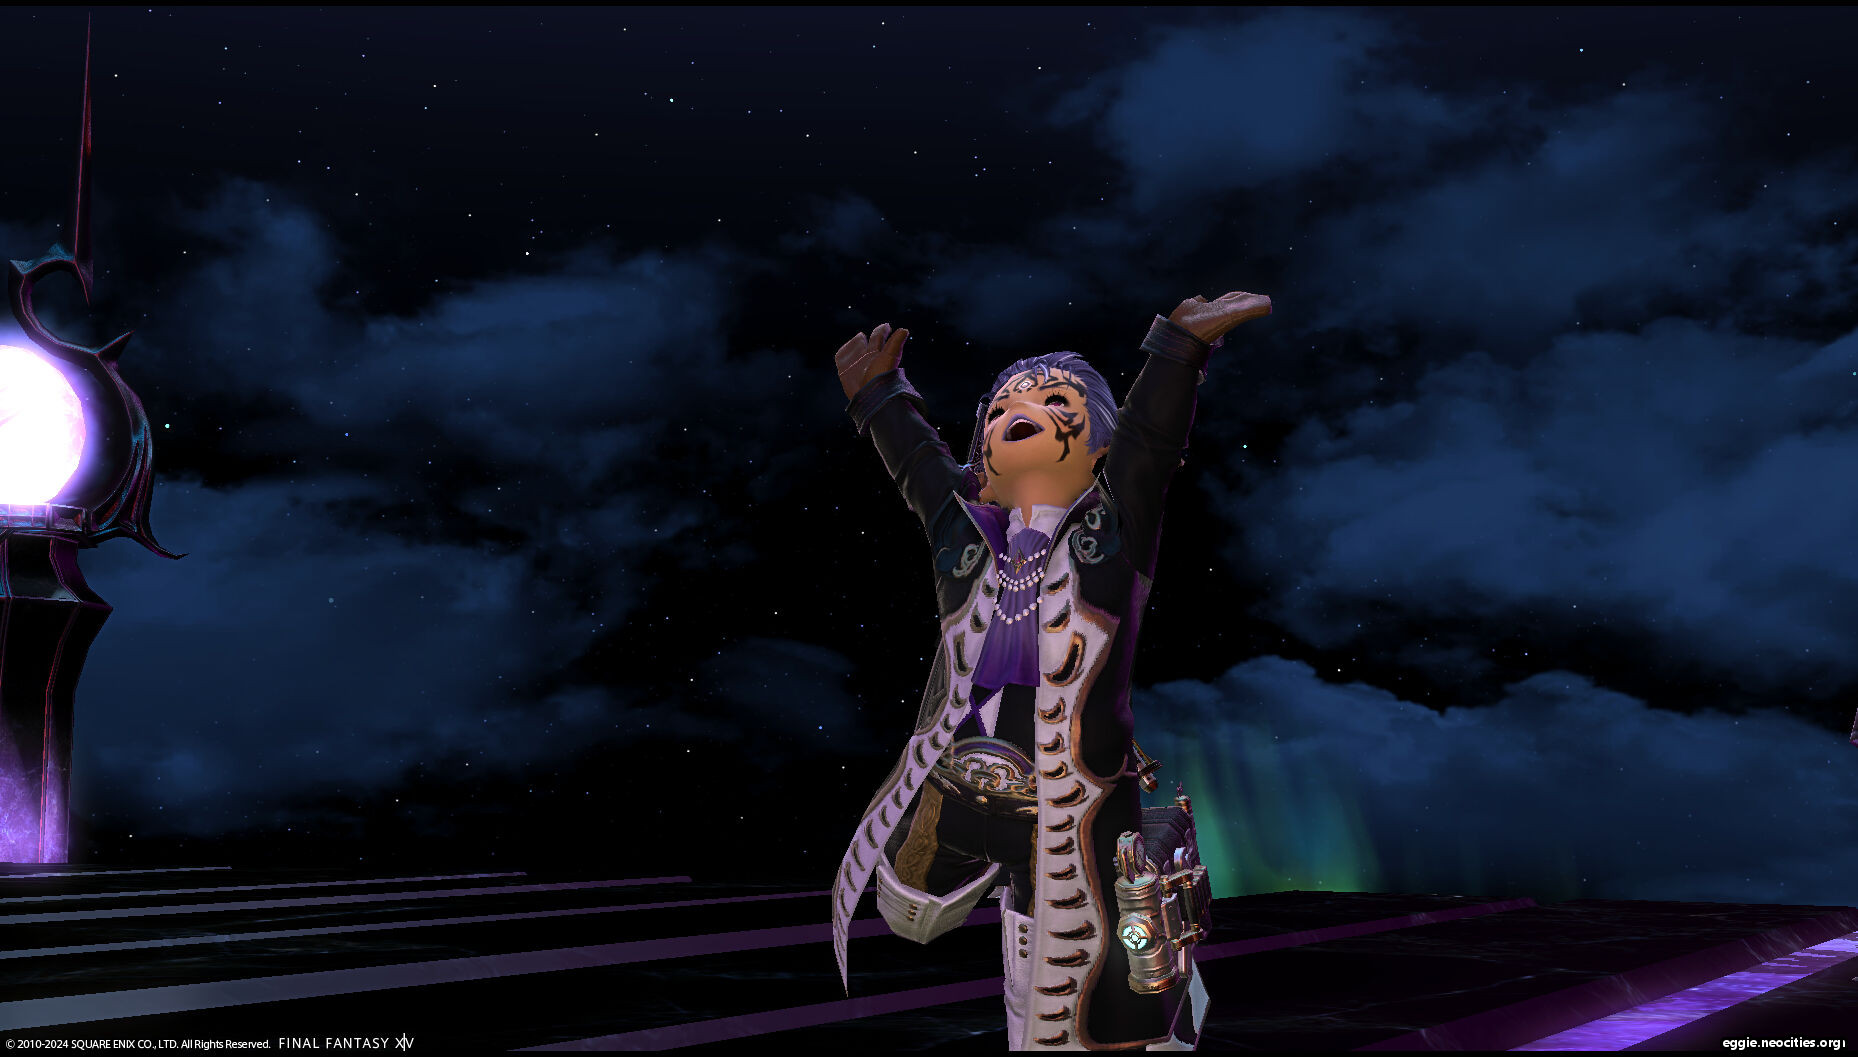 Jacks at the end of World of Darkness doing the lalafell victory emote